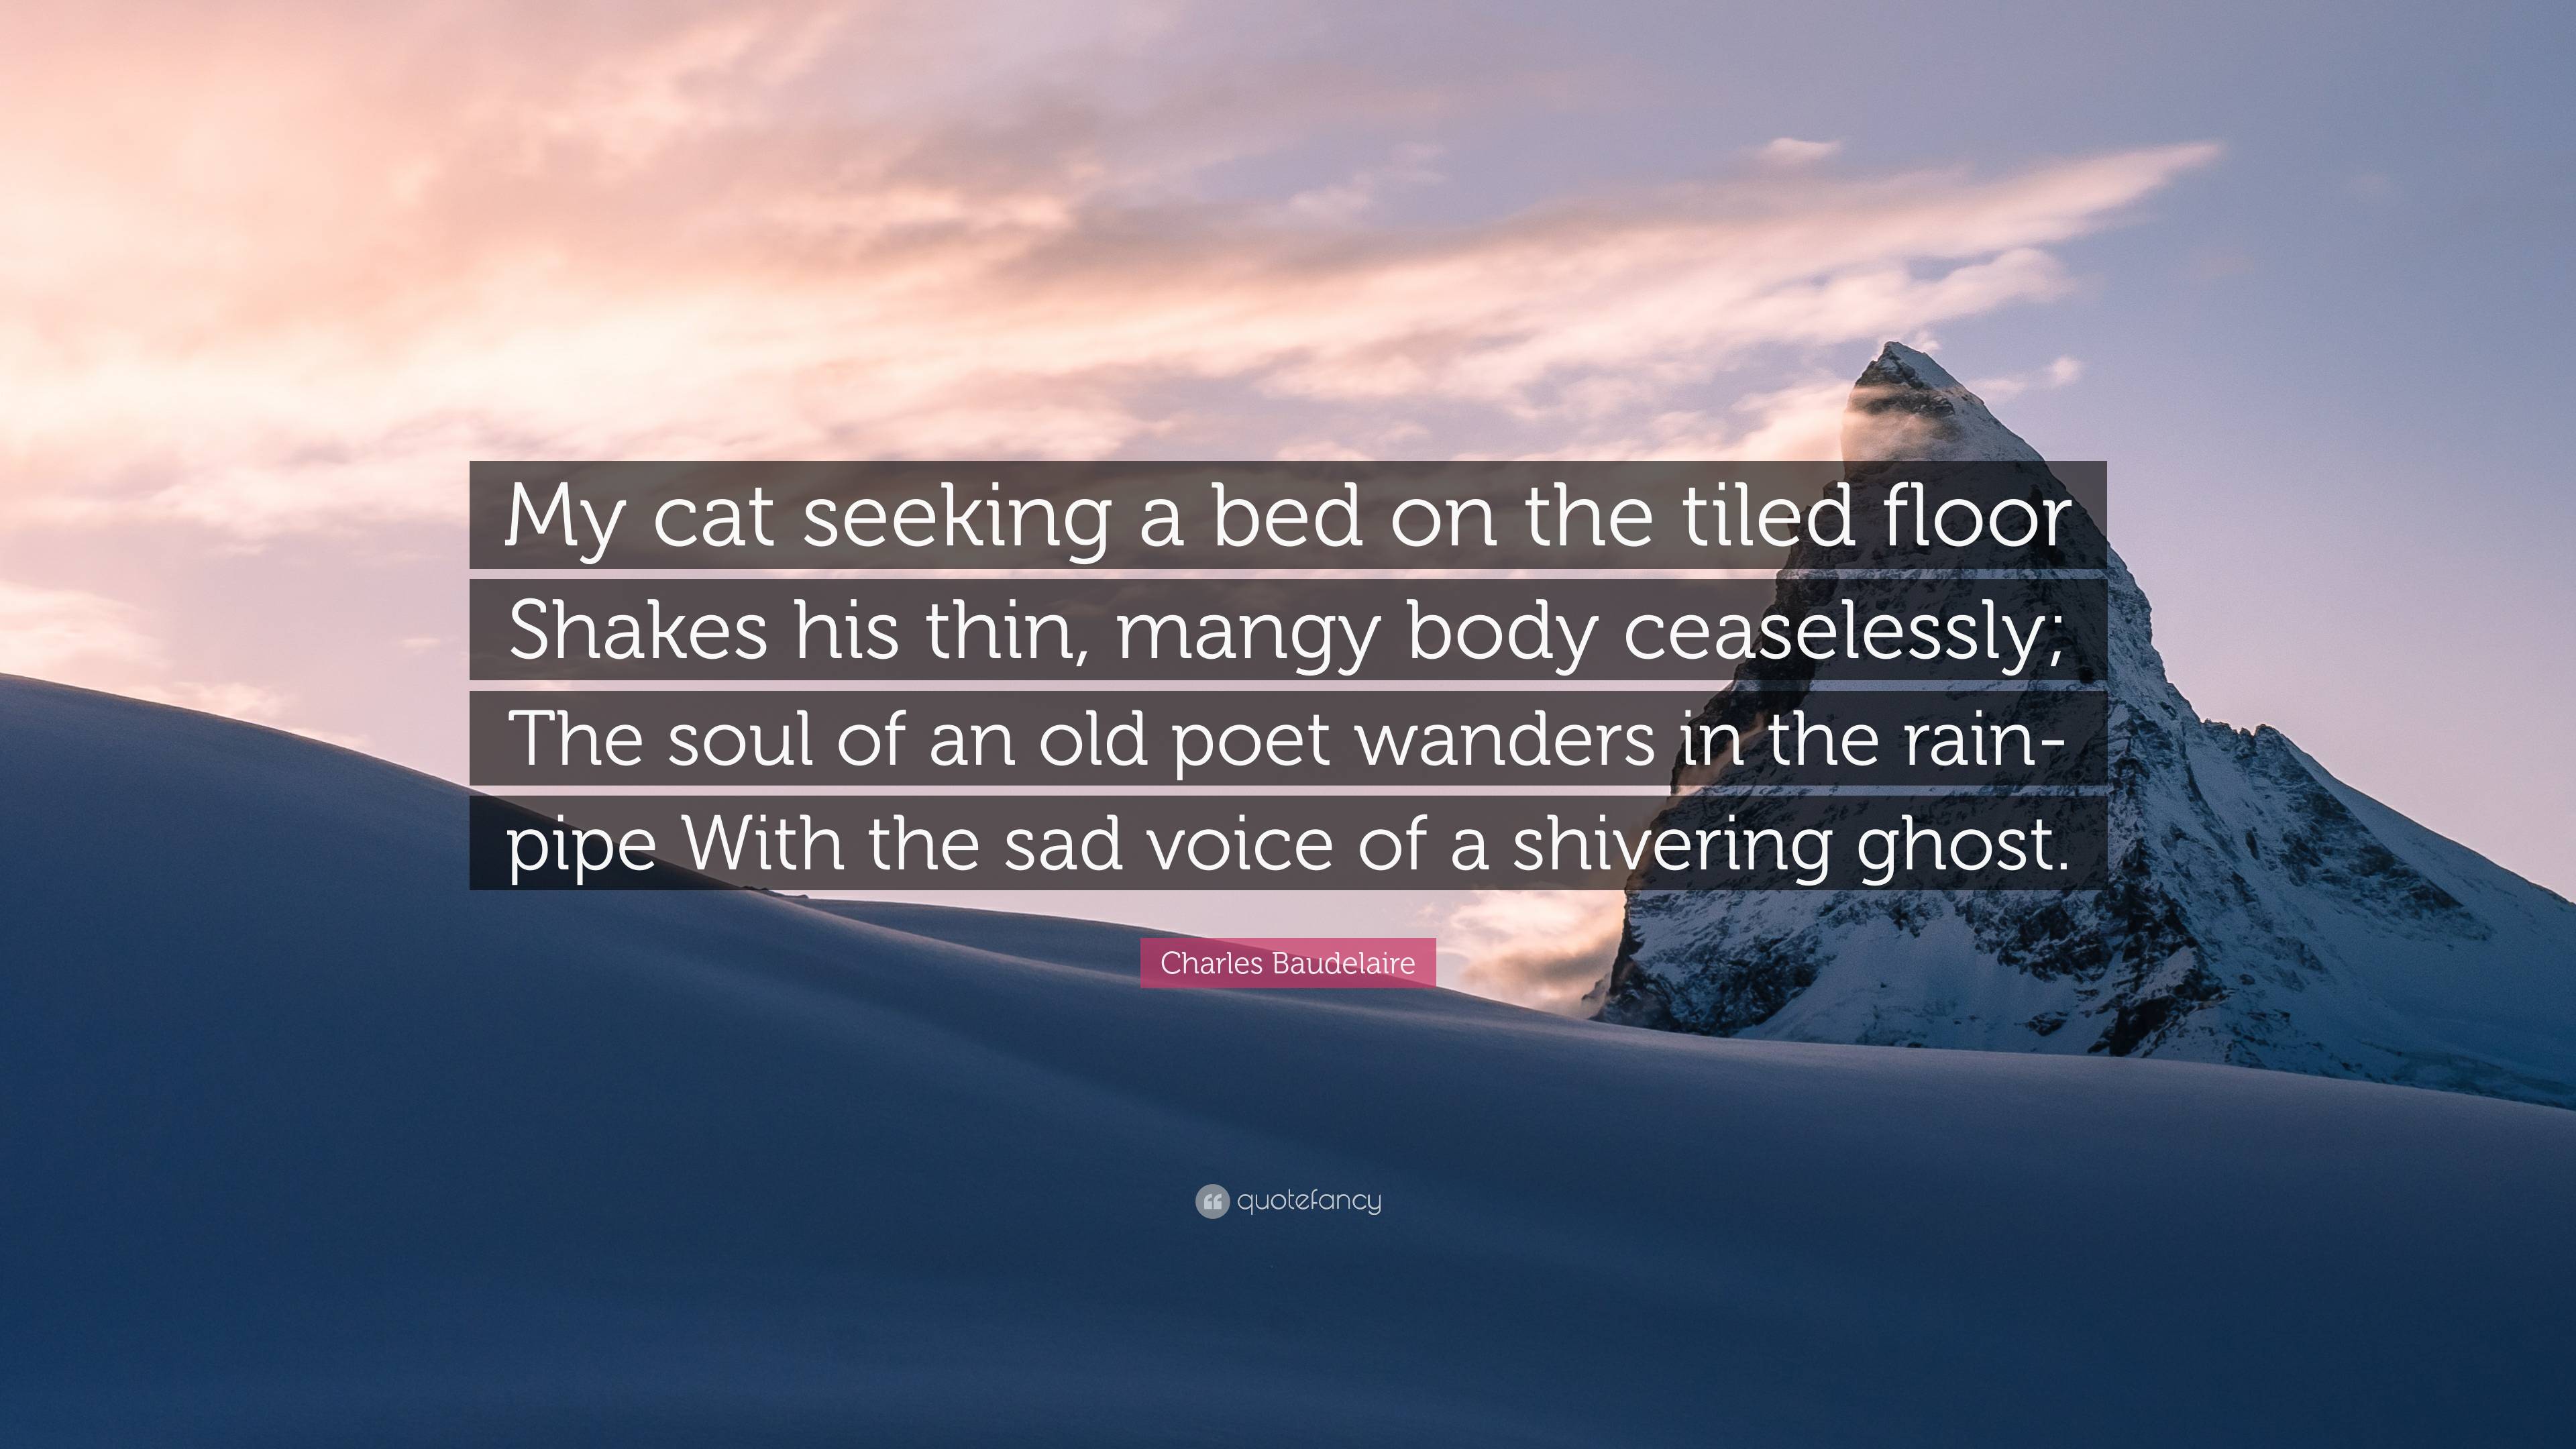 Charles Baudelaire Quote: “My cat seeking a bed on the tiled floor ...